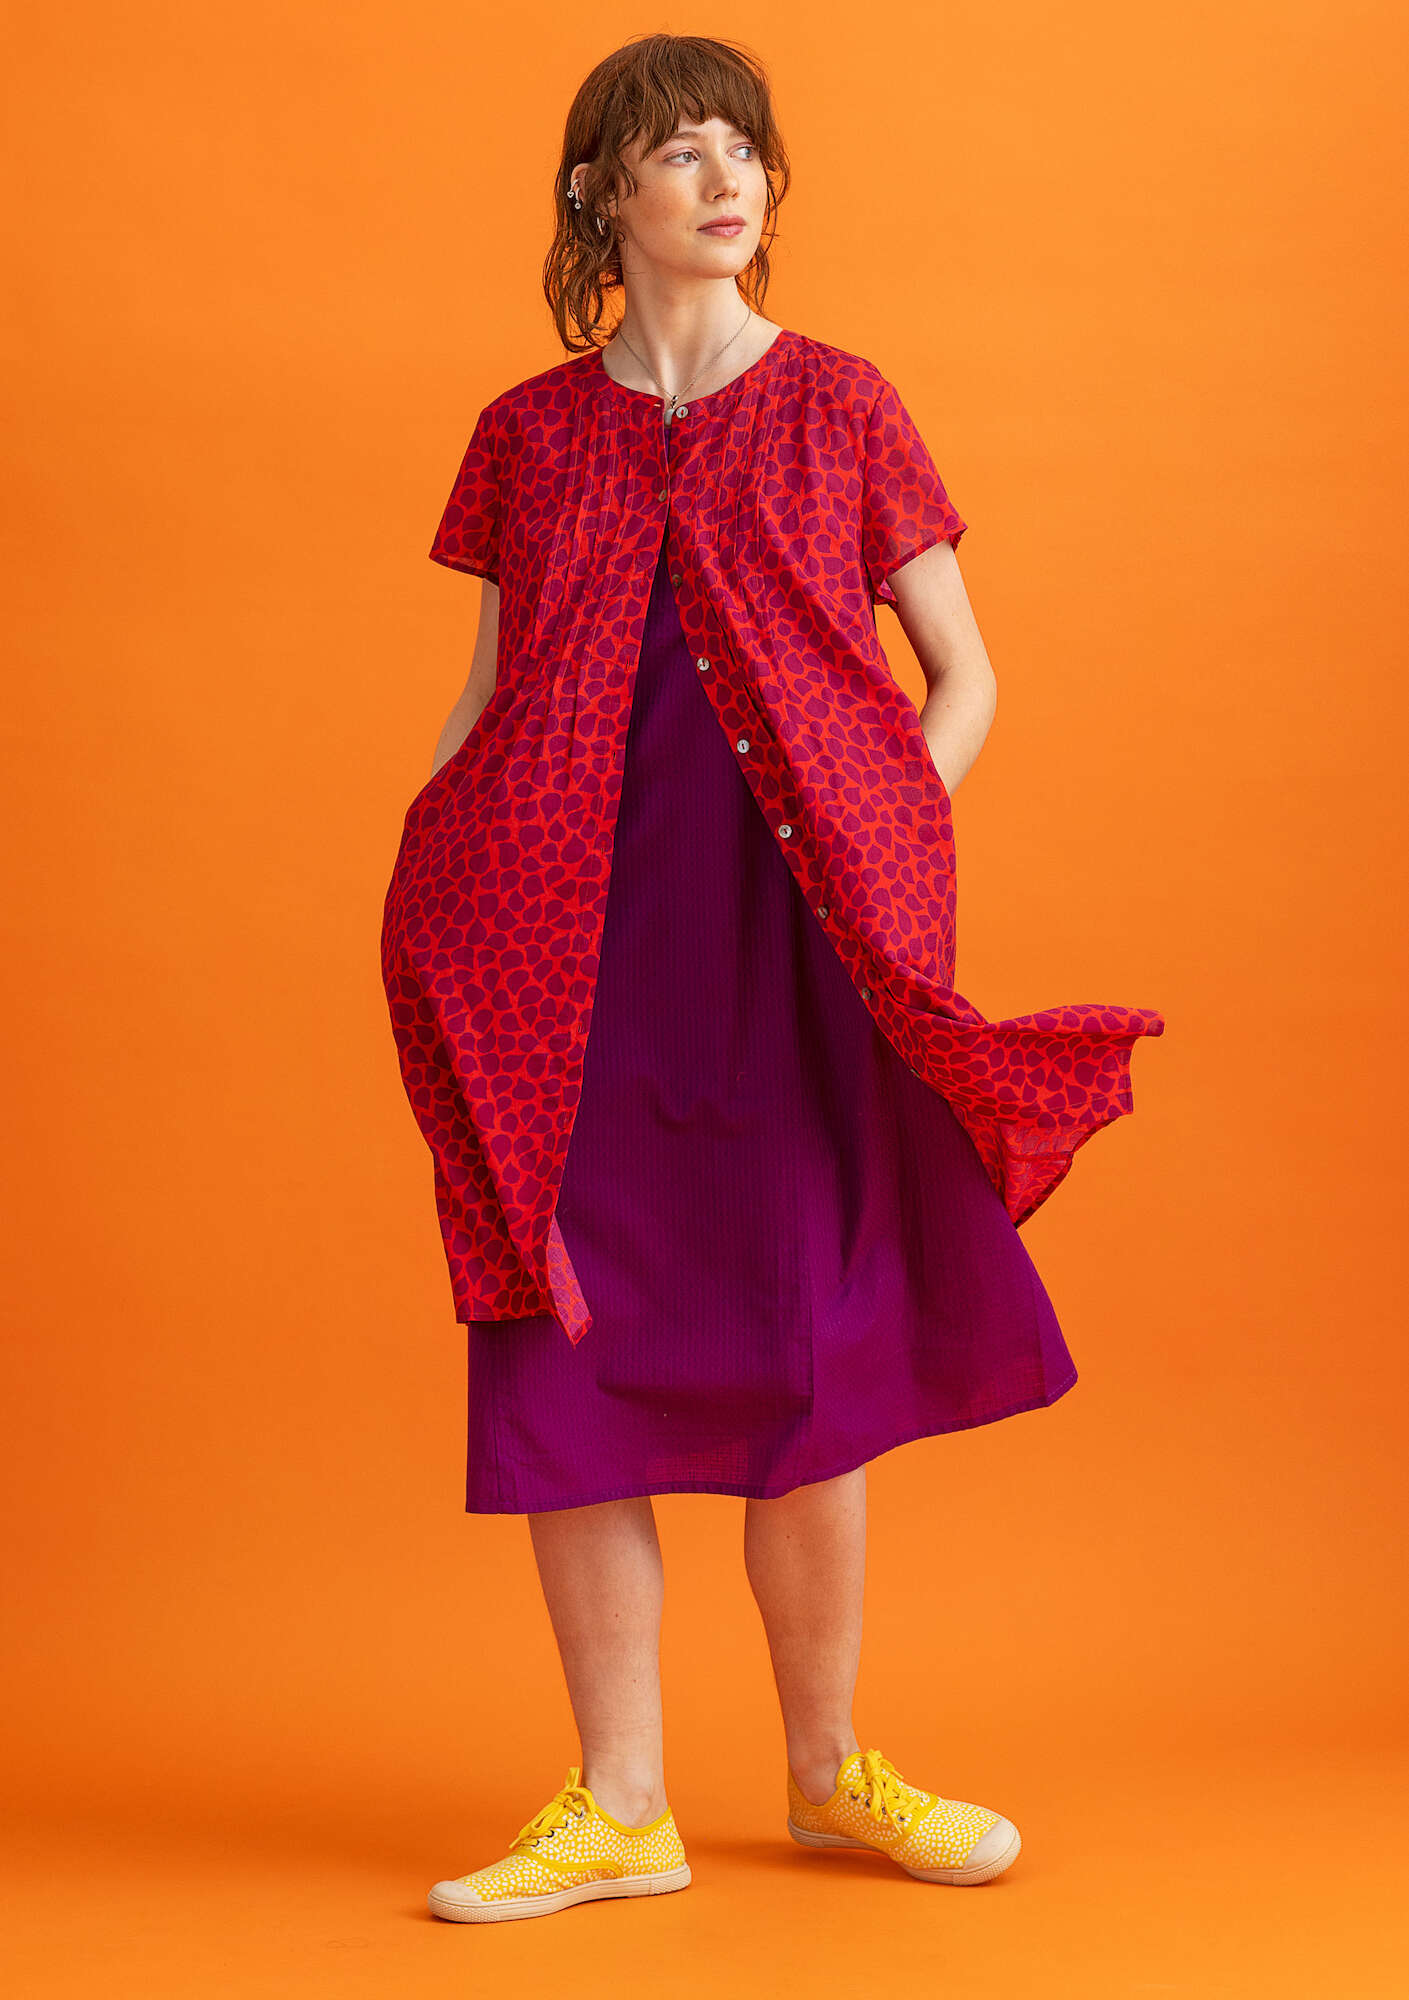 Woven dress parrot red/patterned